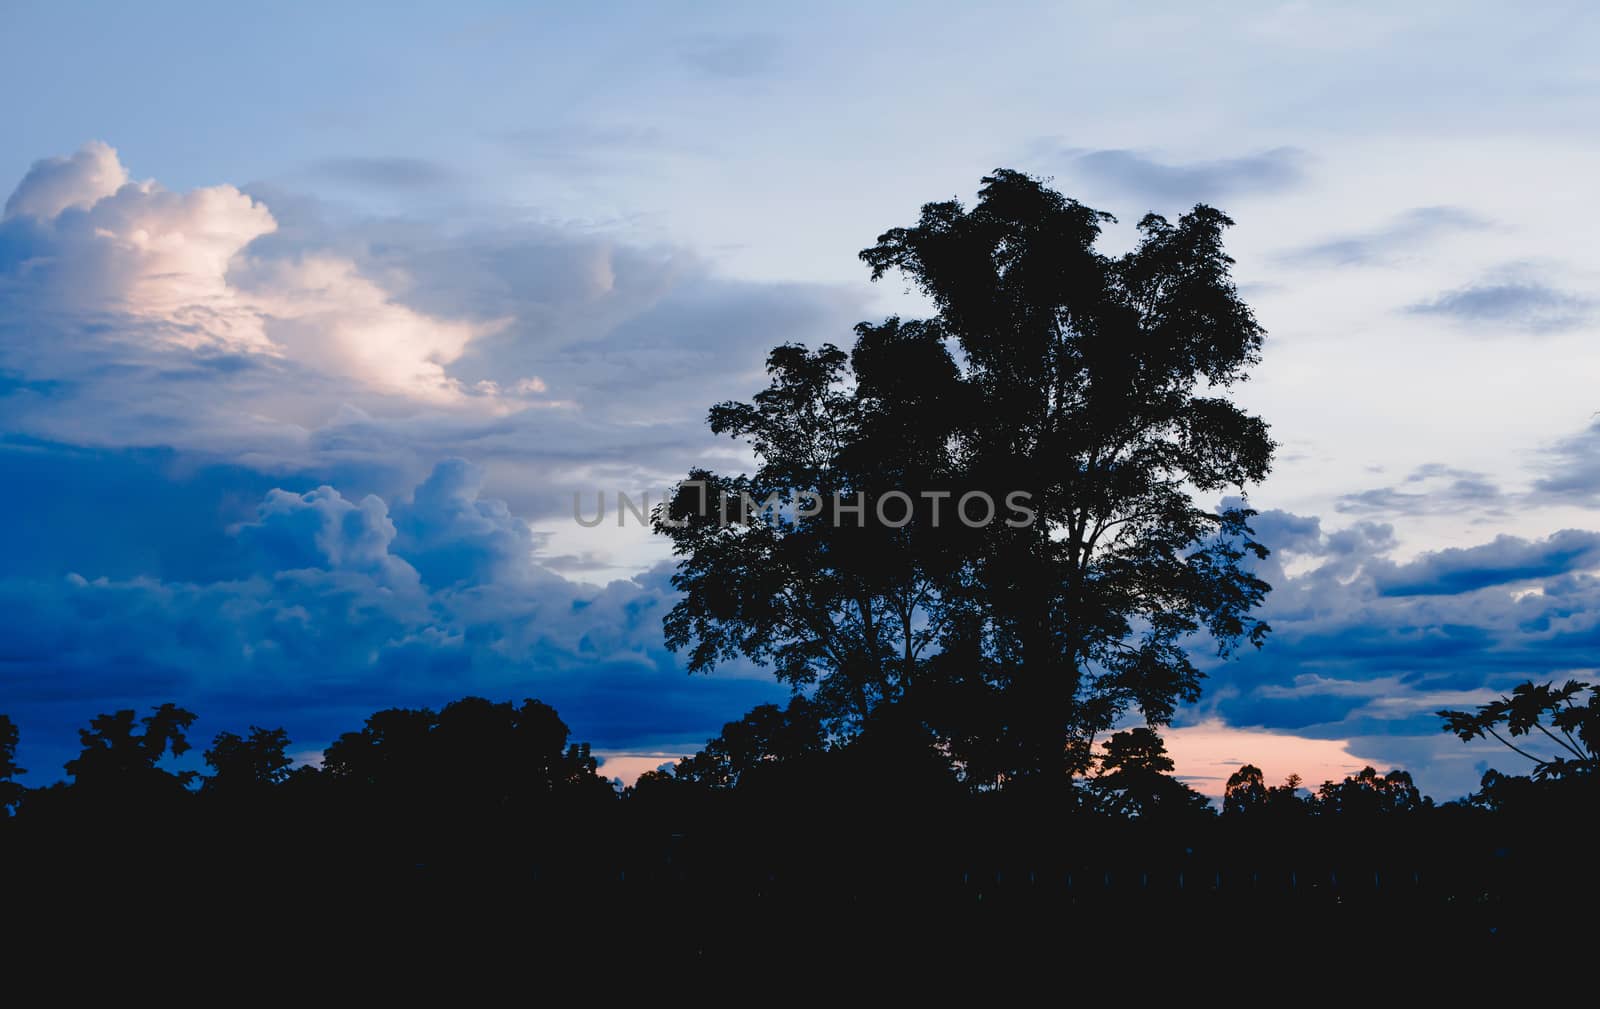 Trees on cloudy with sky at evening background silhouette style. by kirisa99